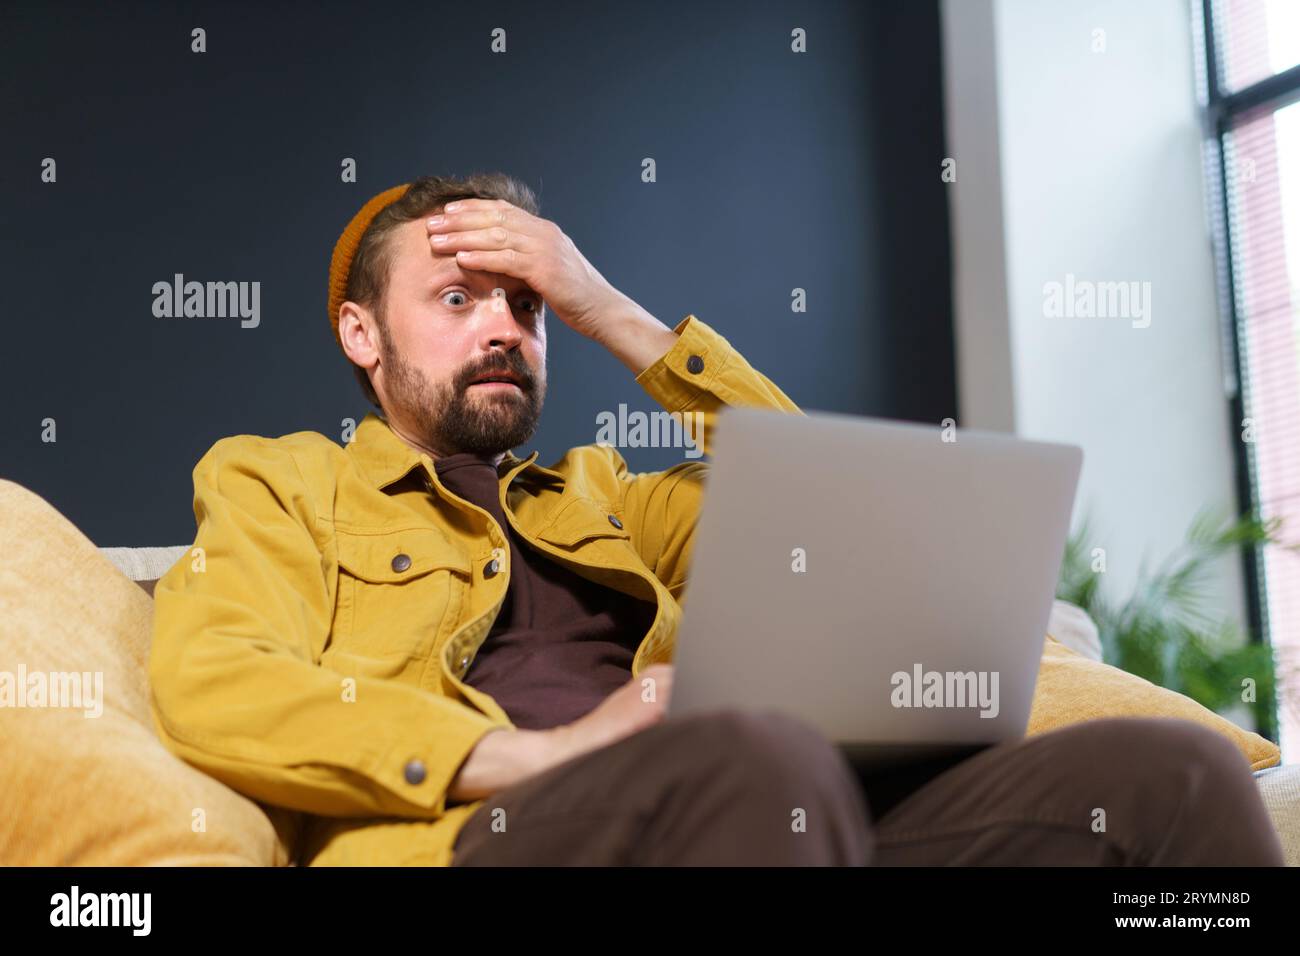 Shocked user's reaction to online content he discovered on internet. man's expression reflects mix of excitement, surprise, and Stock Photo